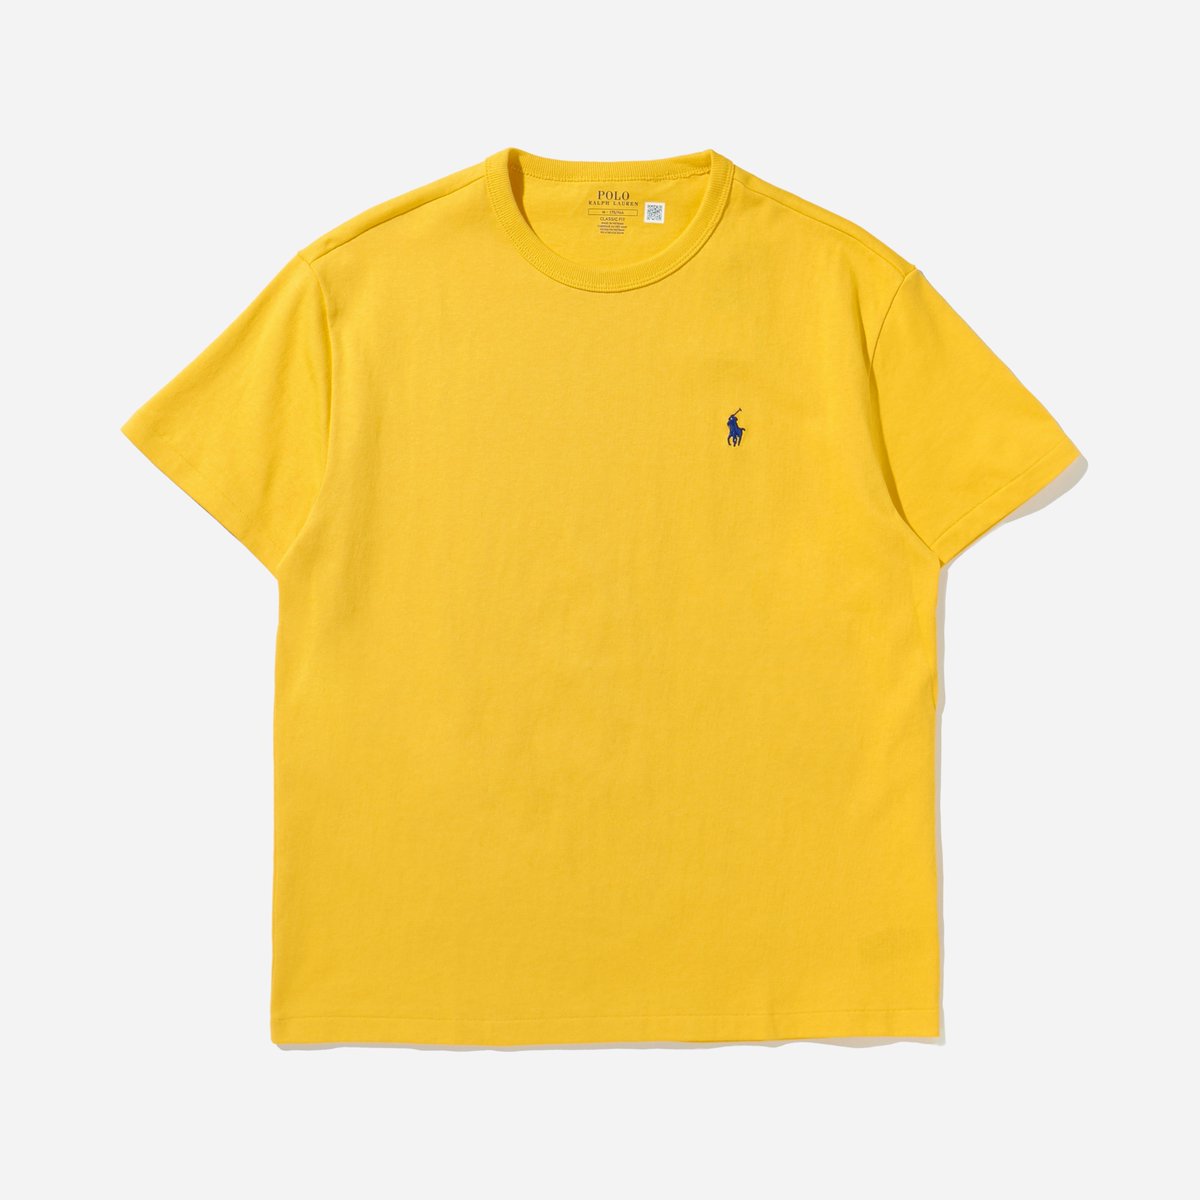 Update your everyday essentials collection with the Heavyweight T-Shirt from Polo Ralph Lauren, available in a range of bright and wearable colours. bit.ly/3vqqOjm #HIP #PoloRalphLauren